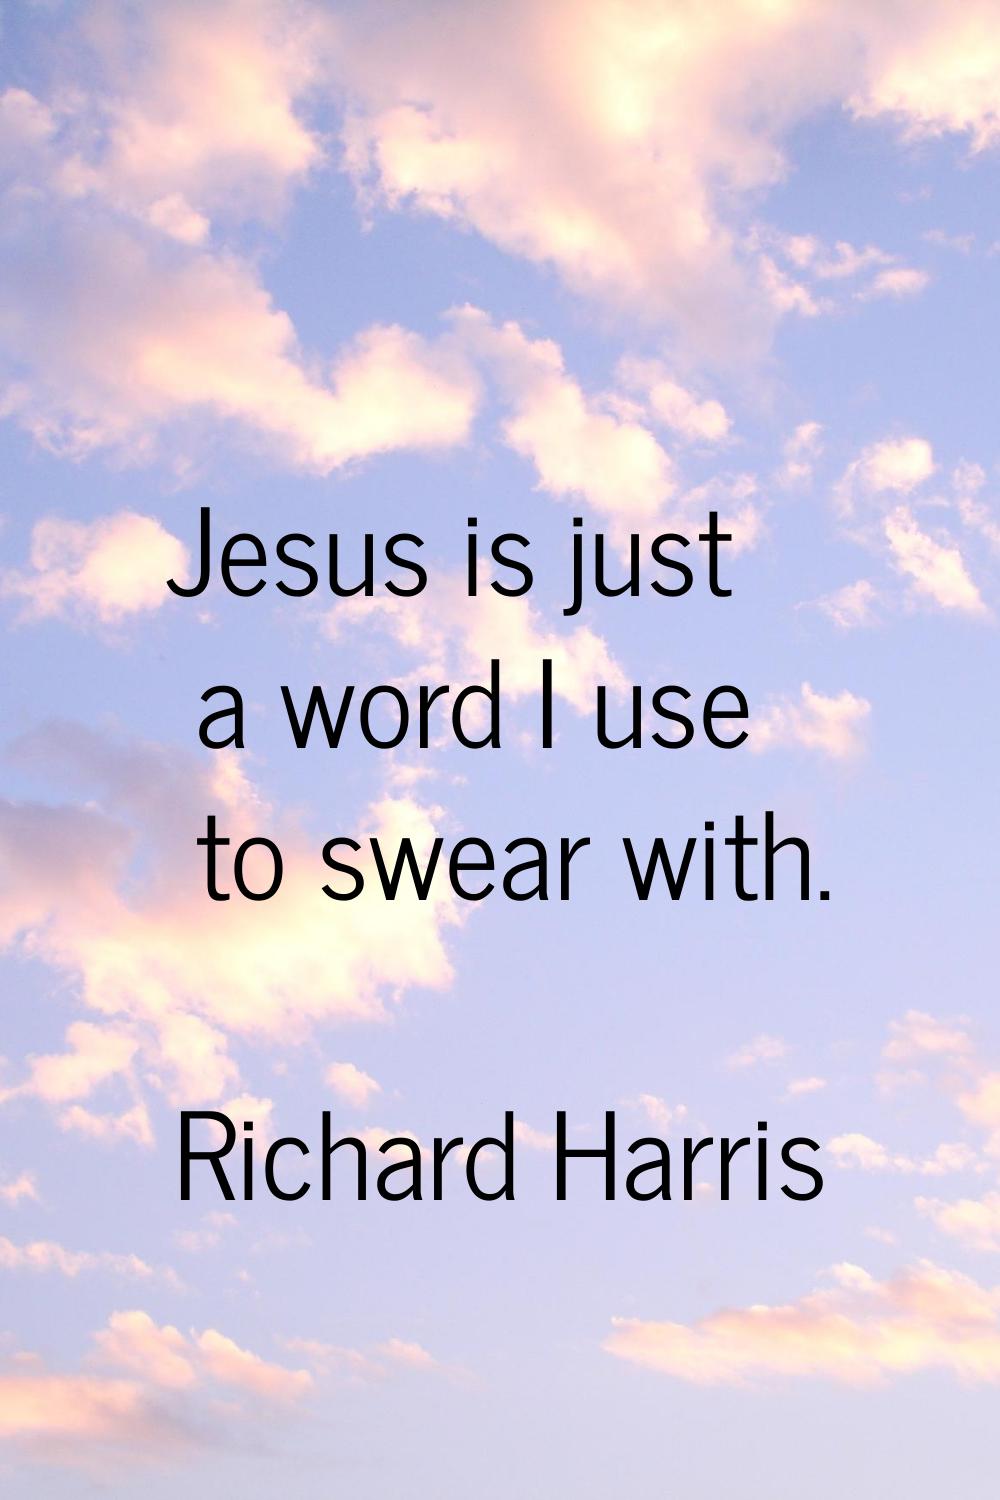 Jesus is just a word I use to swear with.